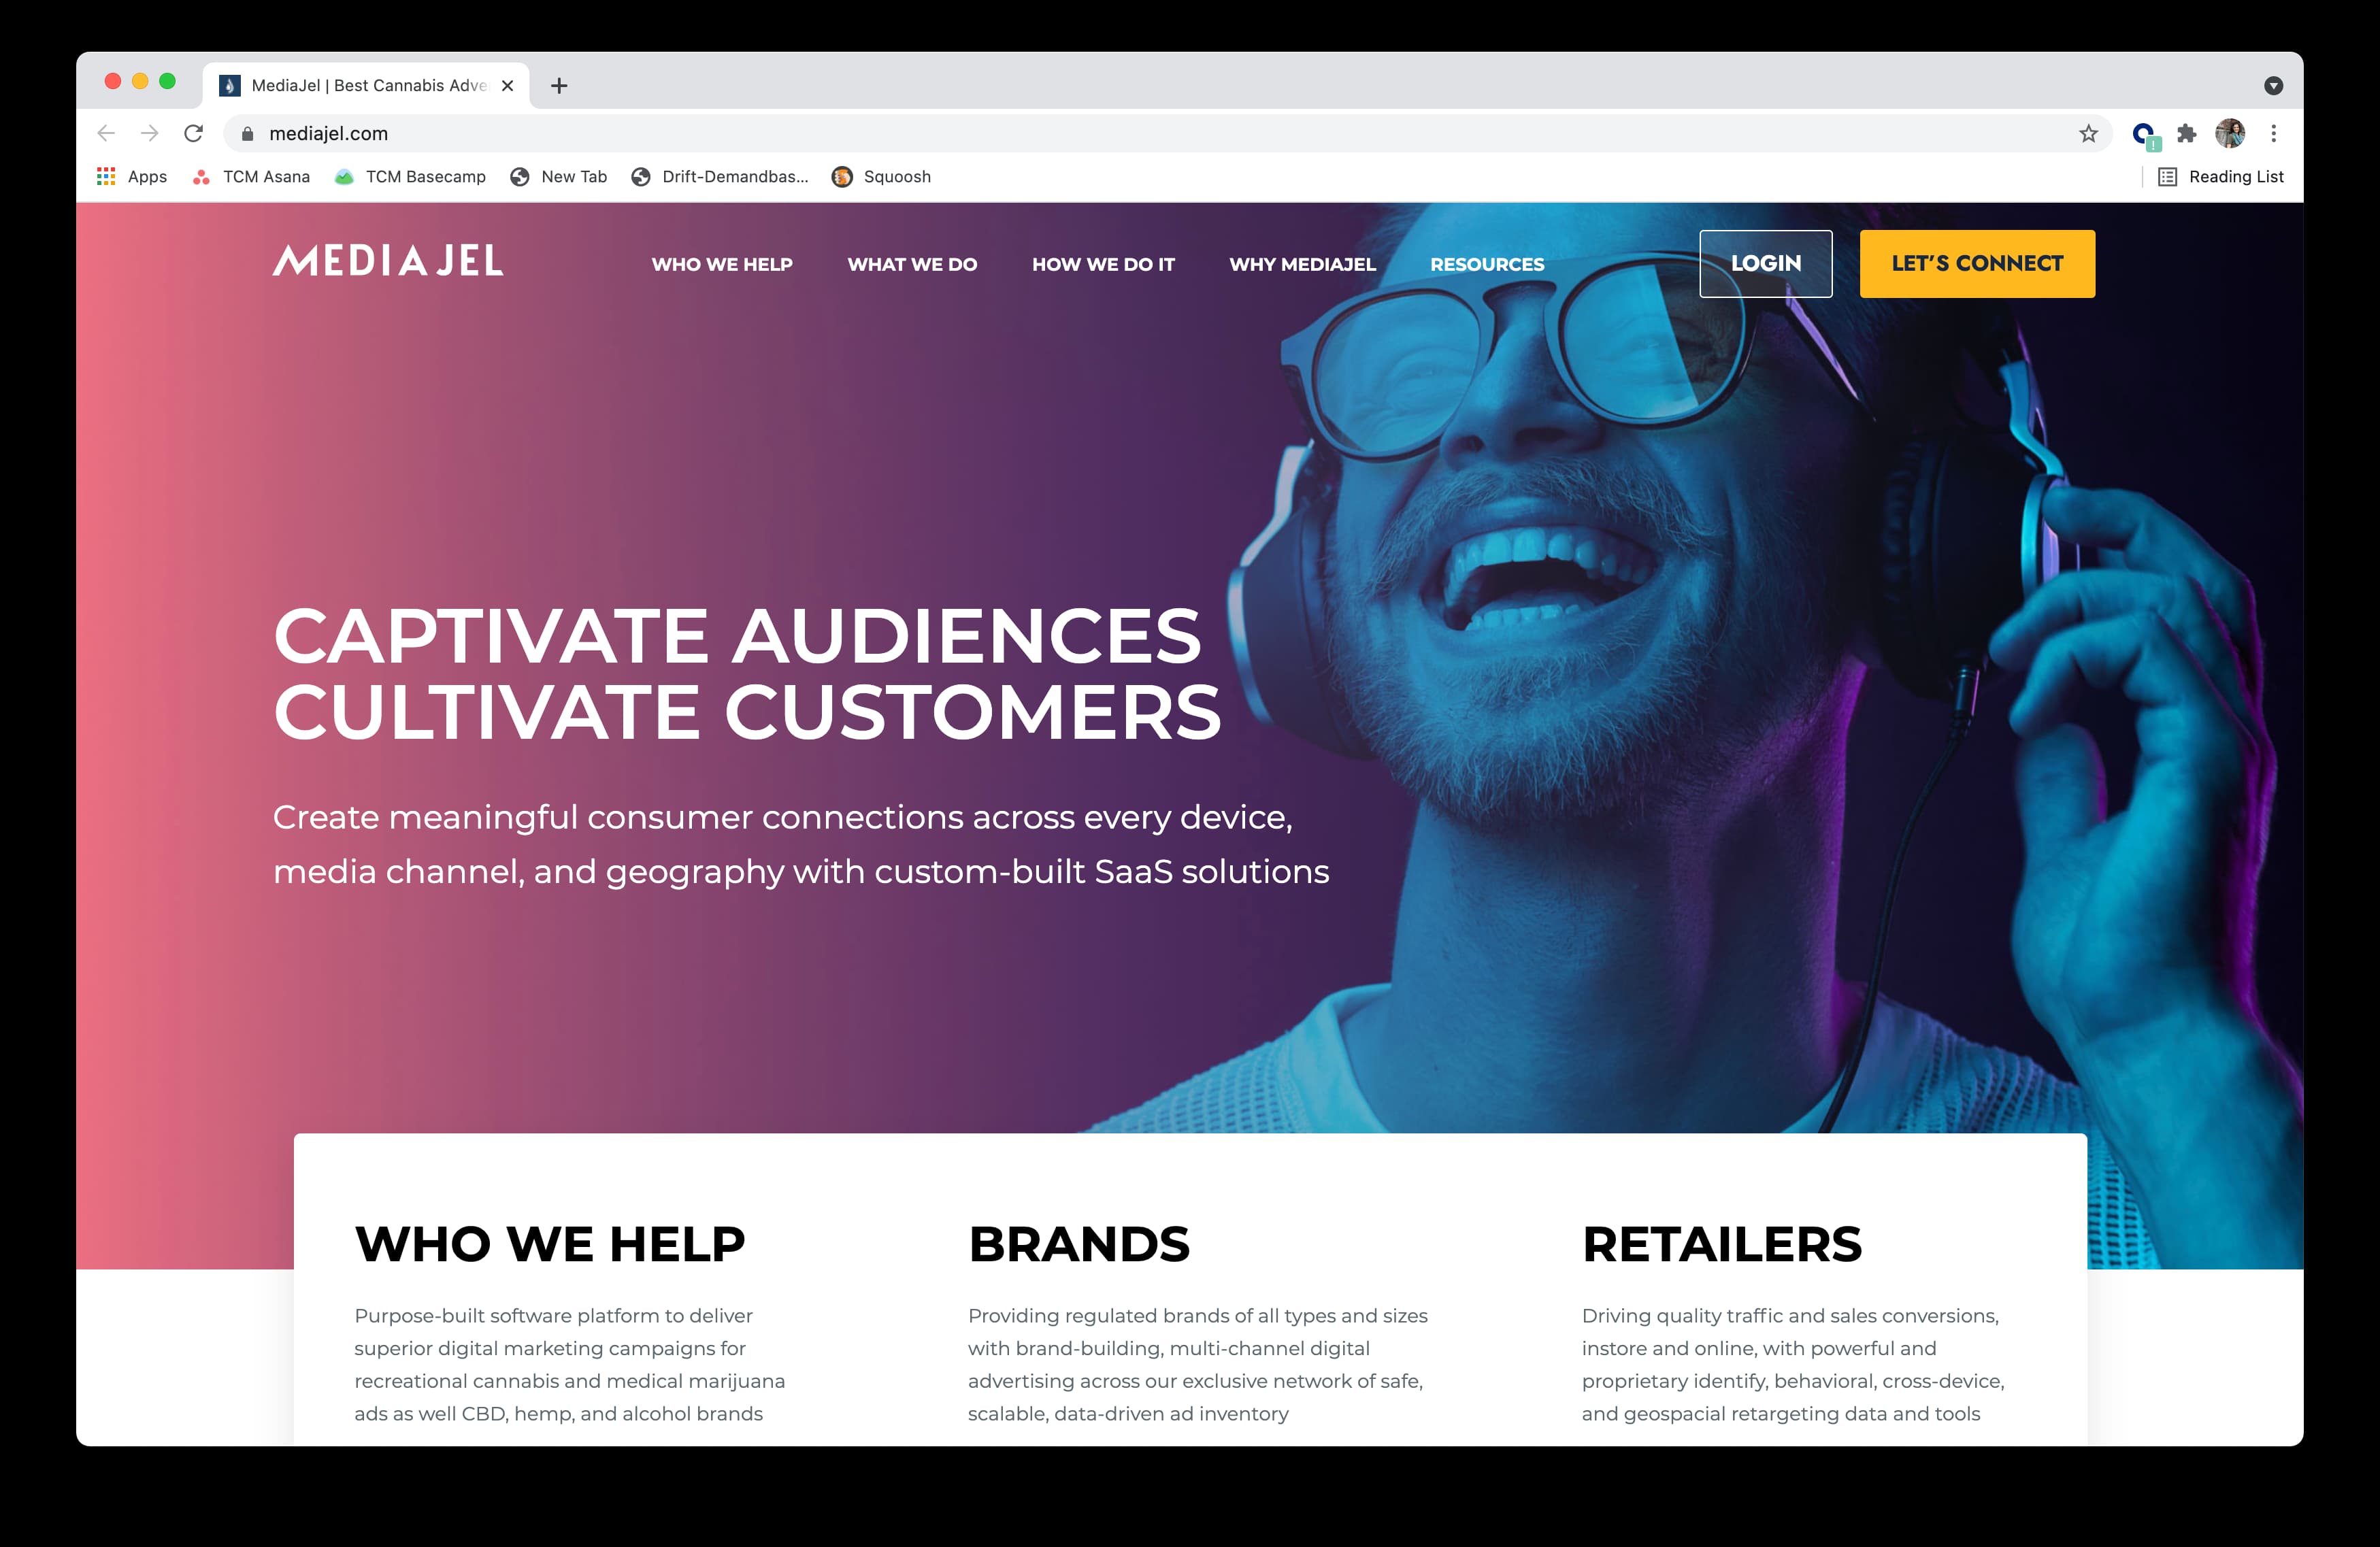 MediaJels homepage uses high-quality images to capture the audiences attention